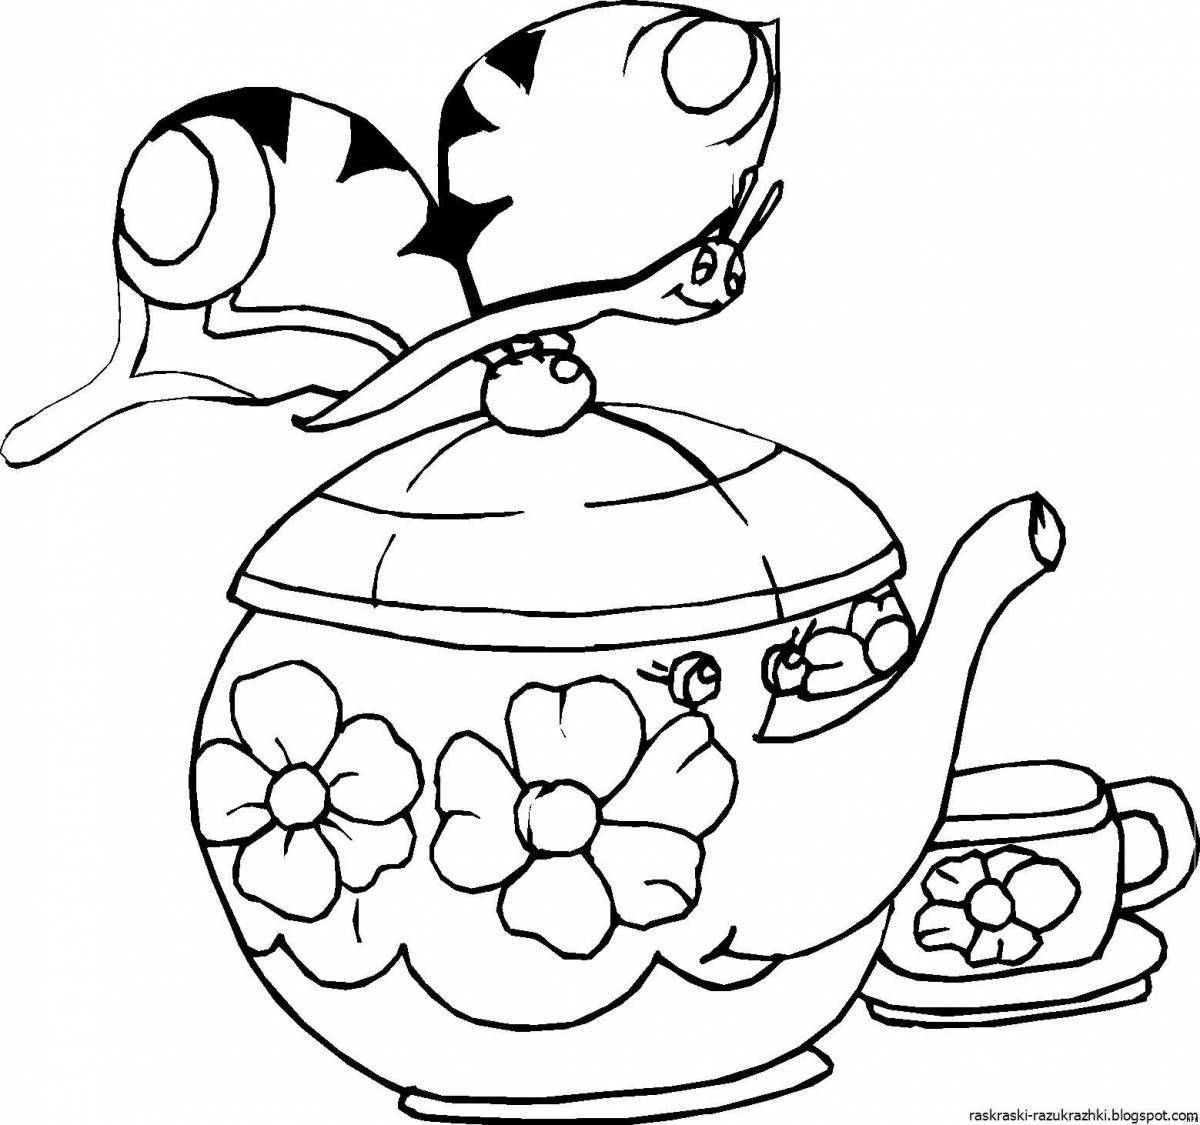 Adorable teapot coloring page for 3-4 year olds